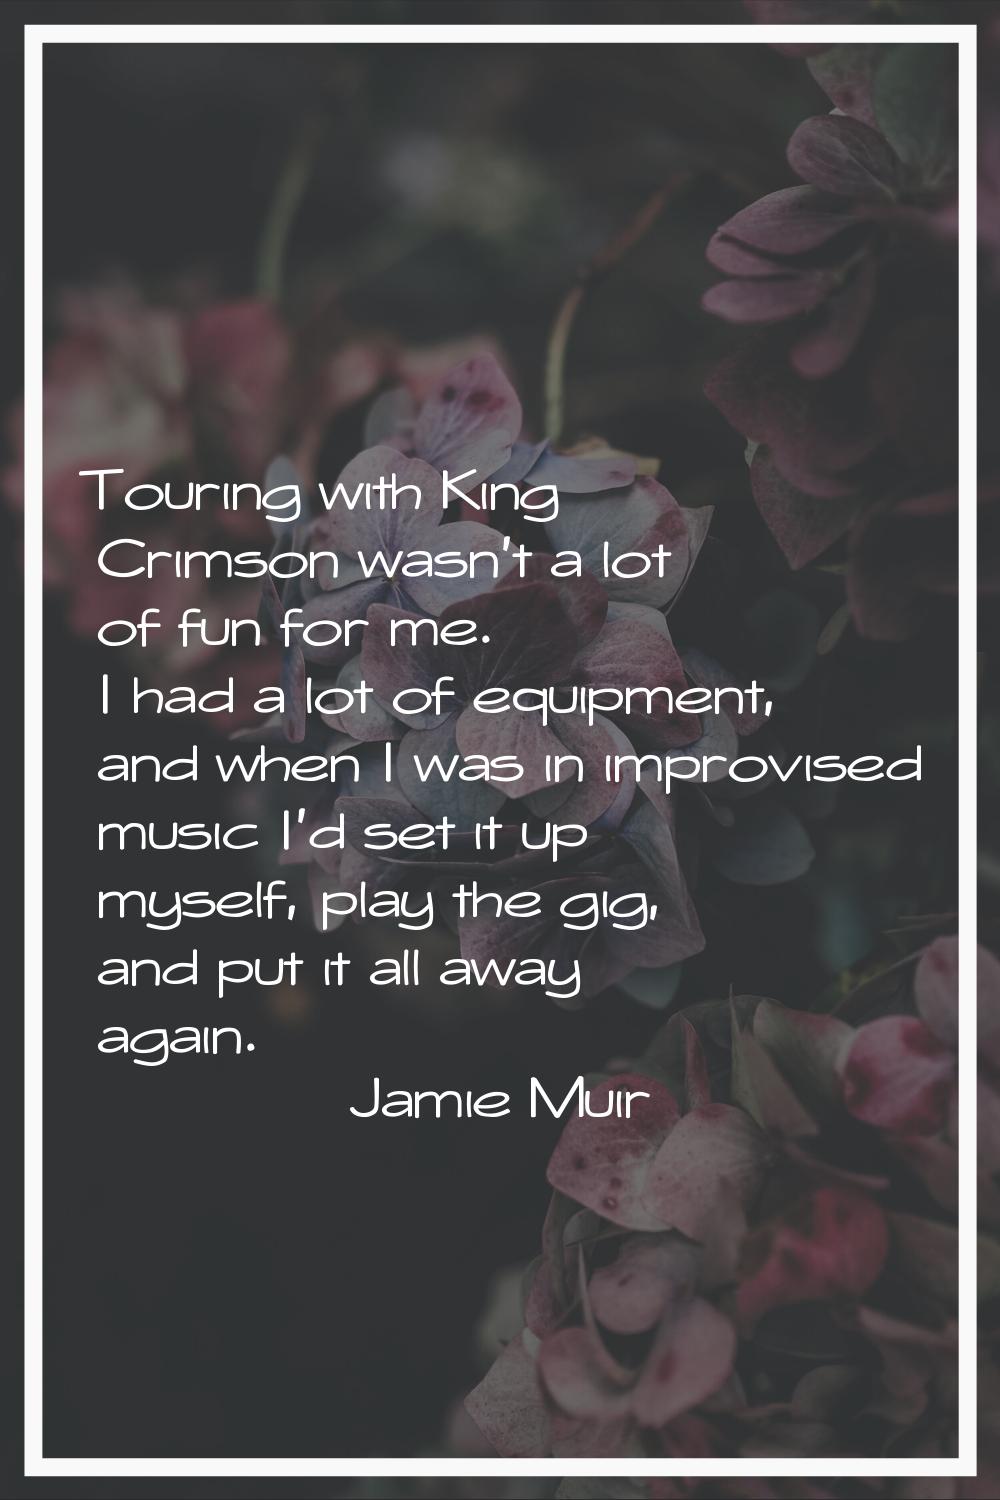 Touring with King Crimson wasn't a lot of fun for me. I had a lot of equipment, and when I was in i